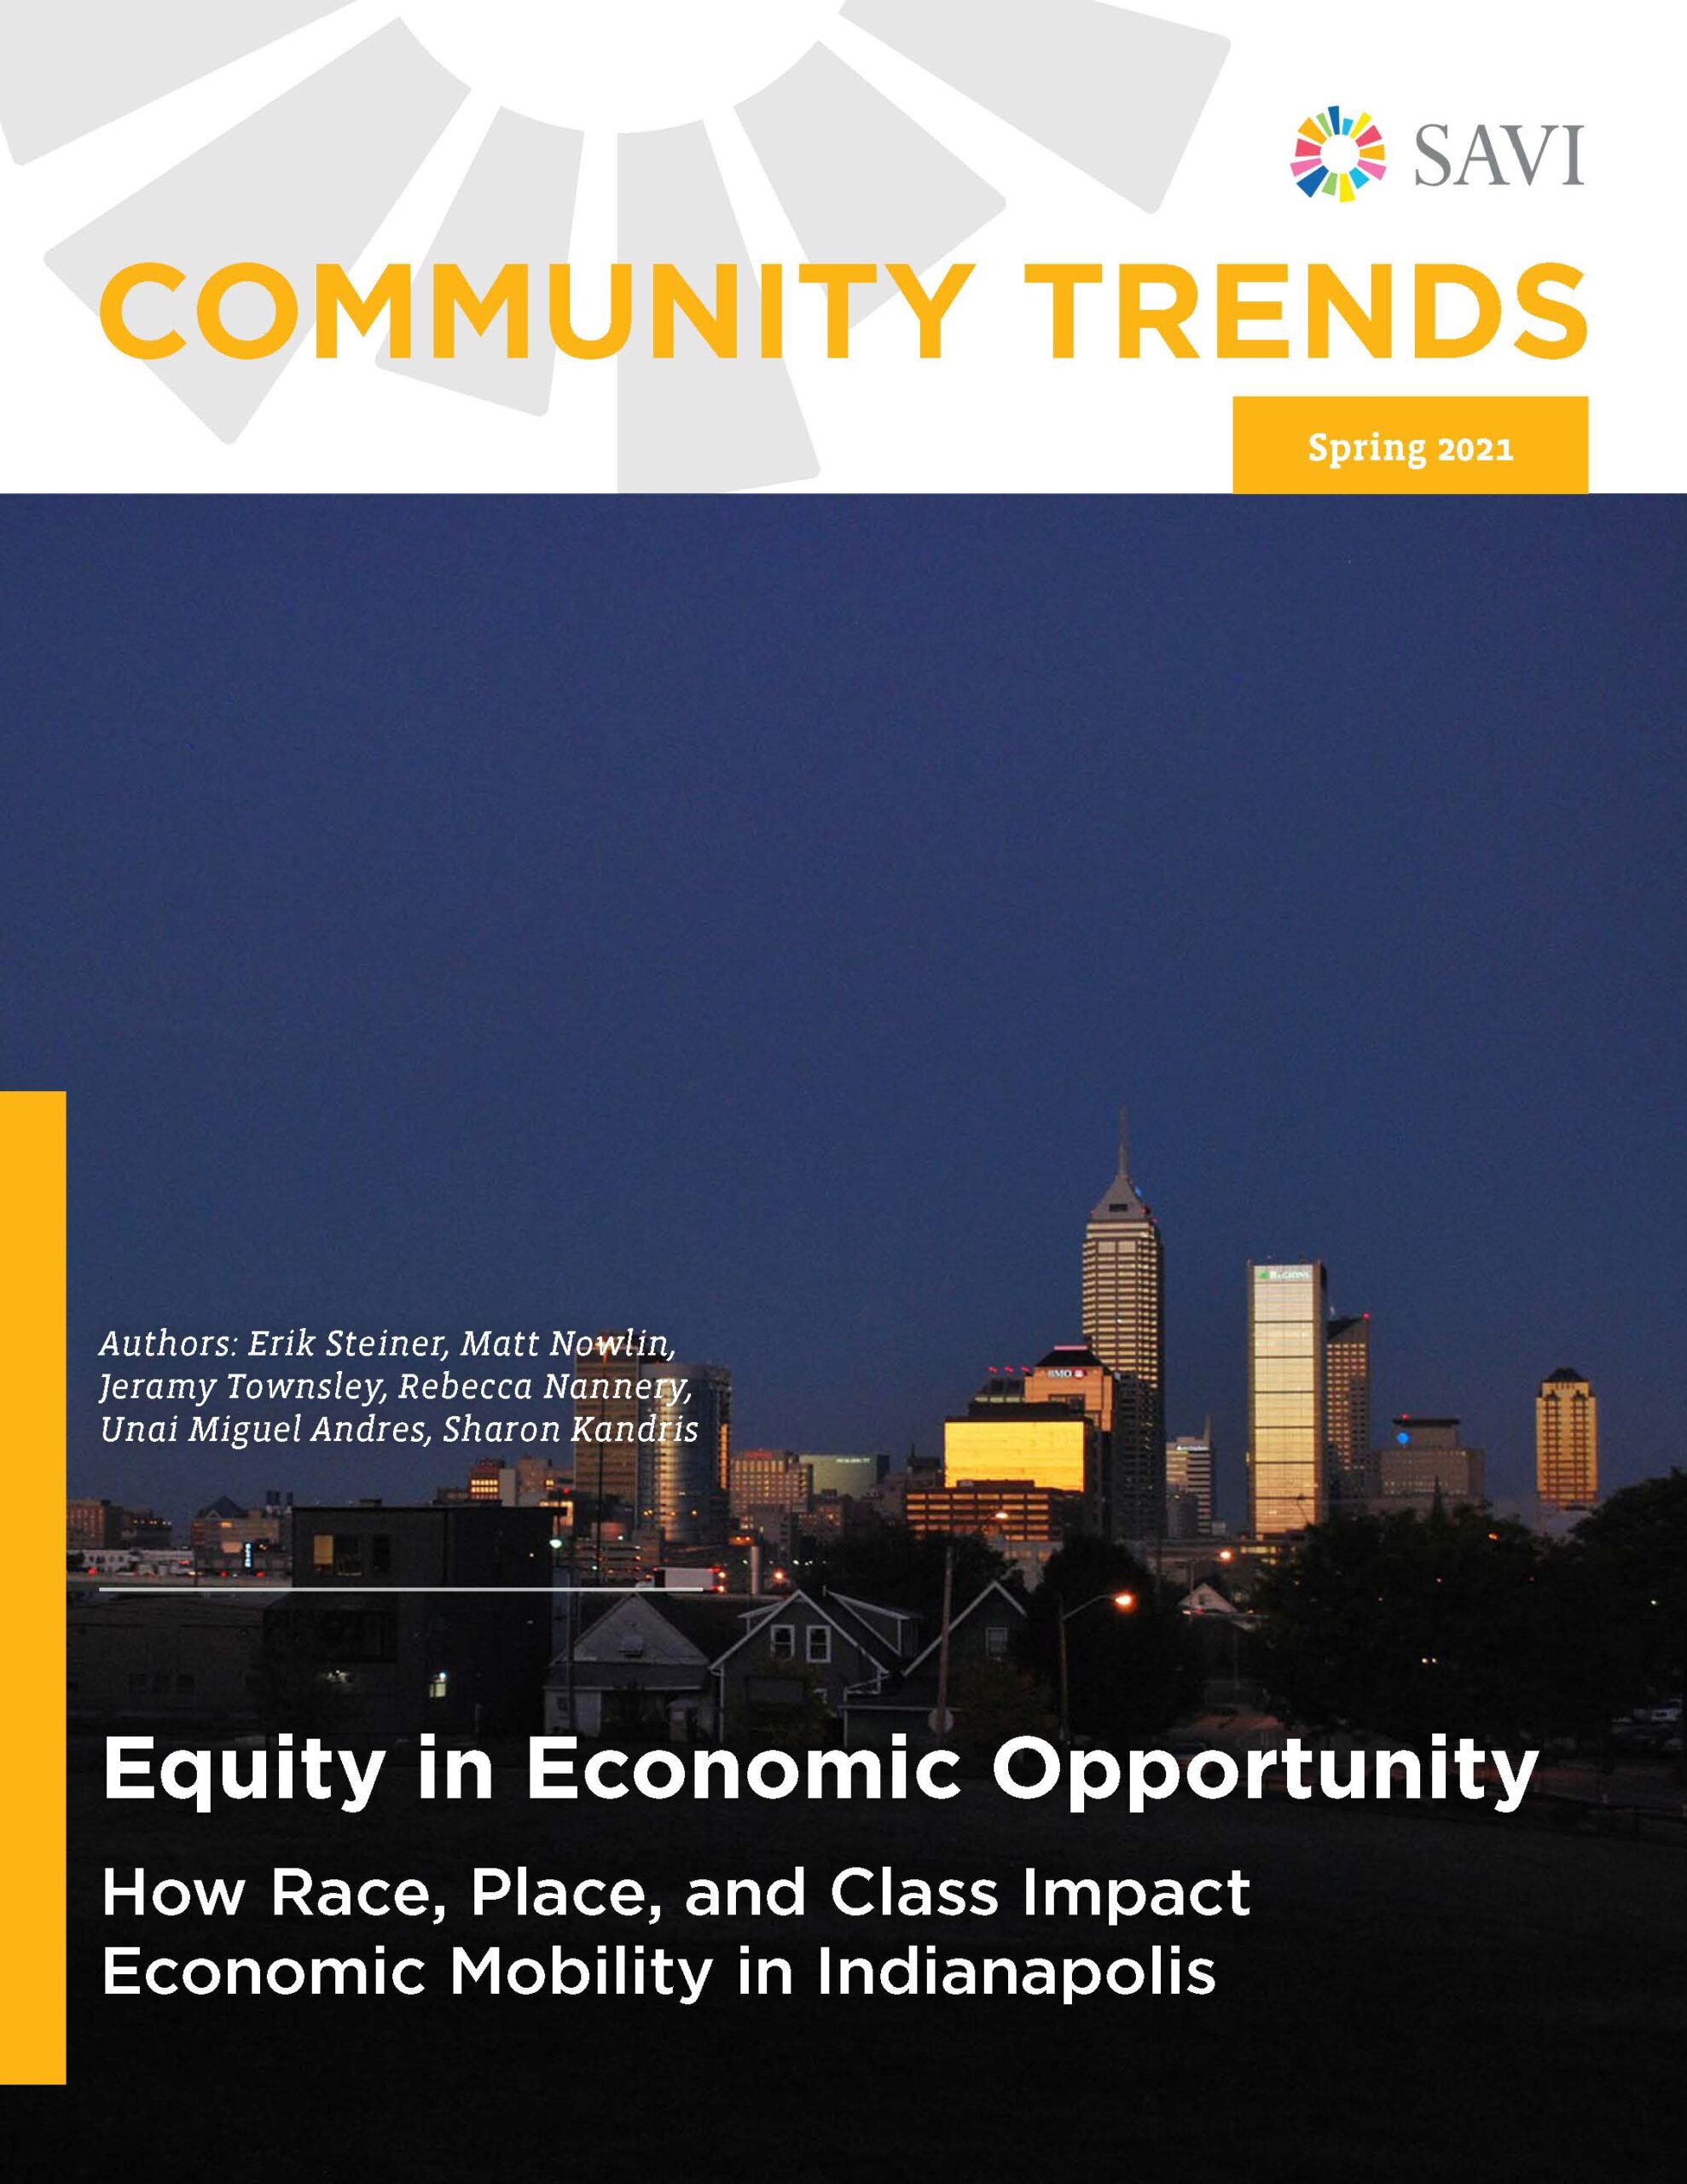 Equity-in-Economic-Opportunity-report cover